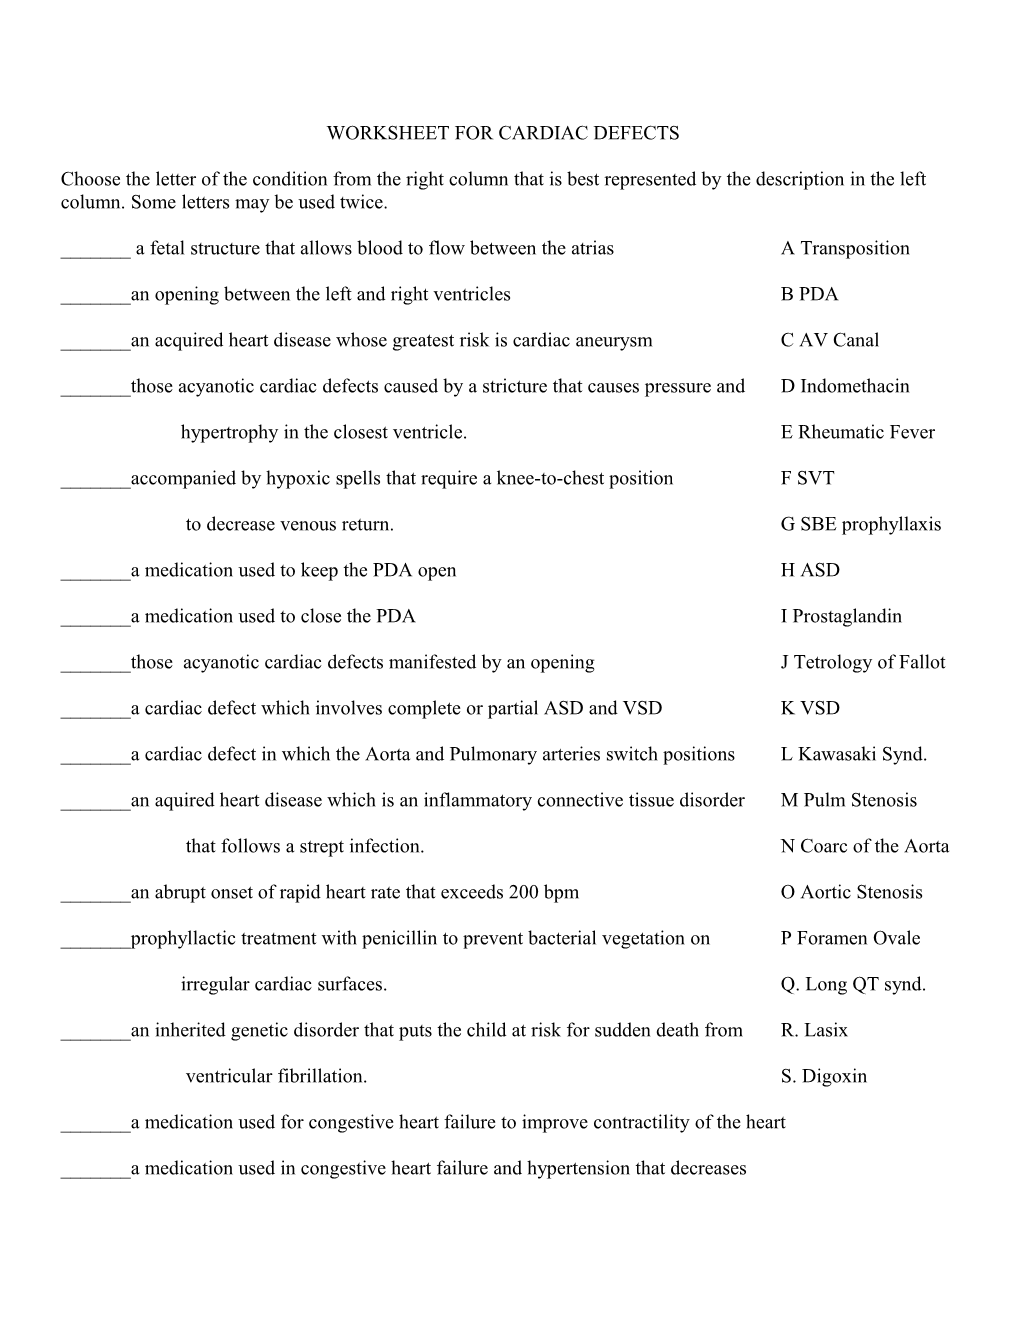 Worksheet for Cardiac Defects